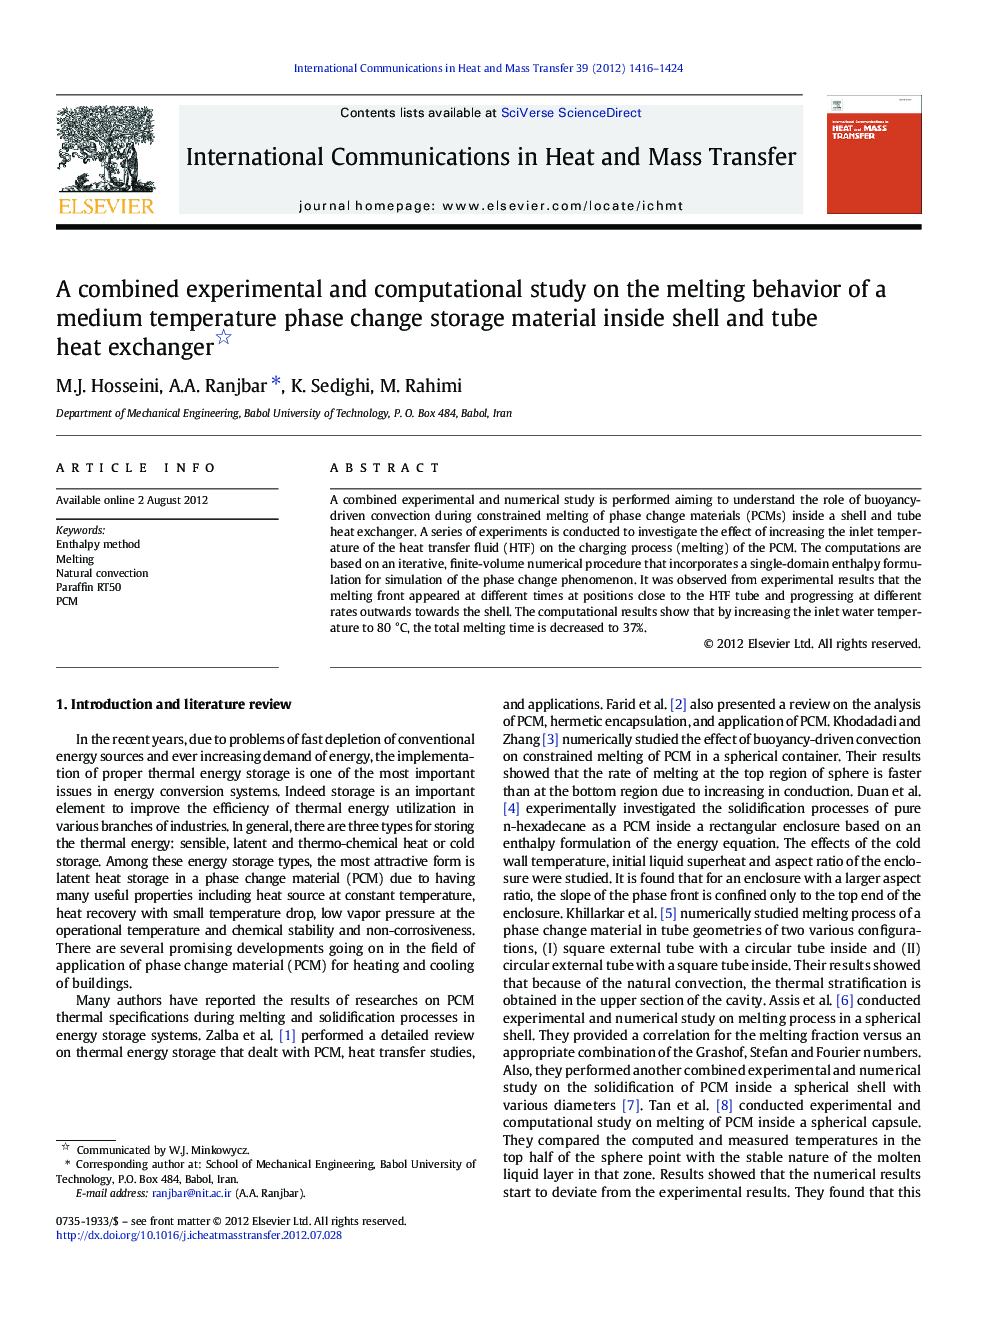 A combined experimental and computational study on the melting behavior of a medium temperature phase change storage material inside shell and tube heat exchanger 